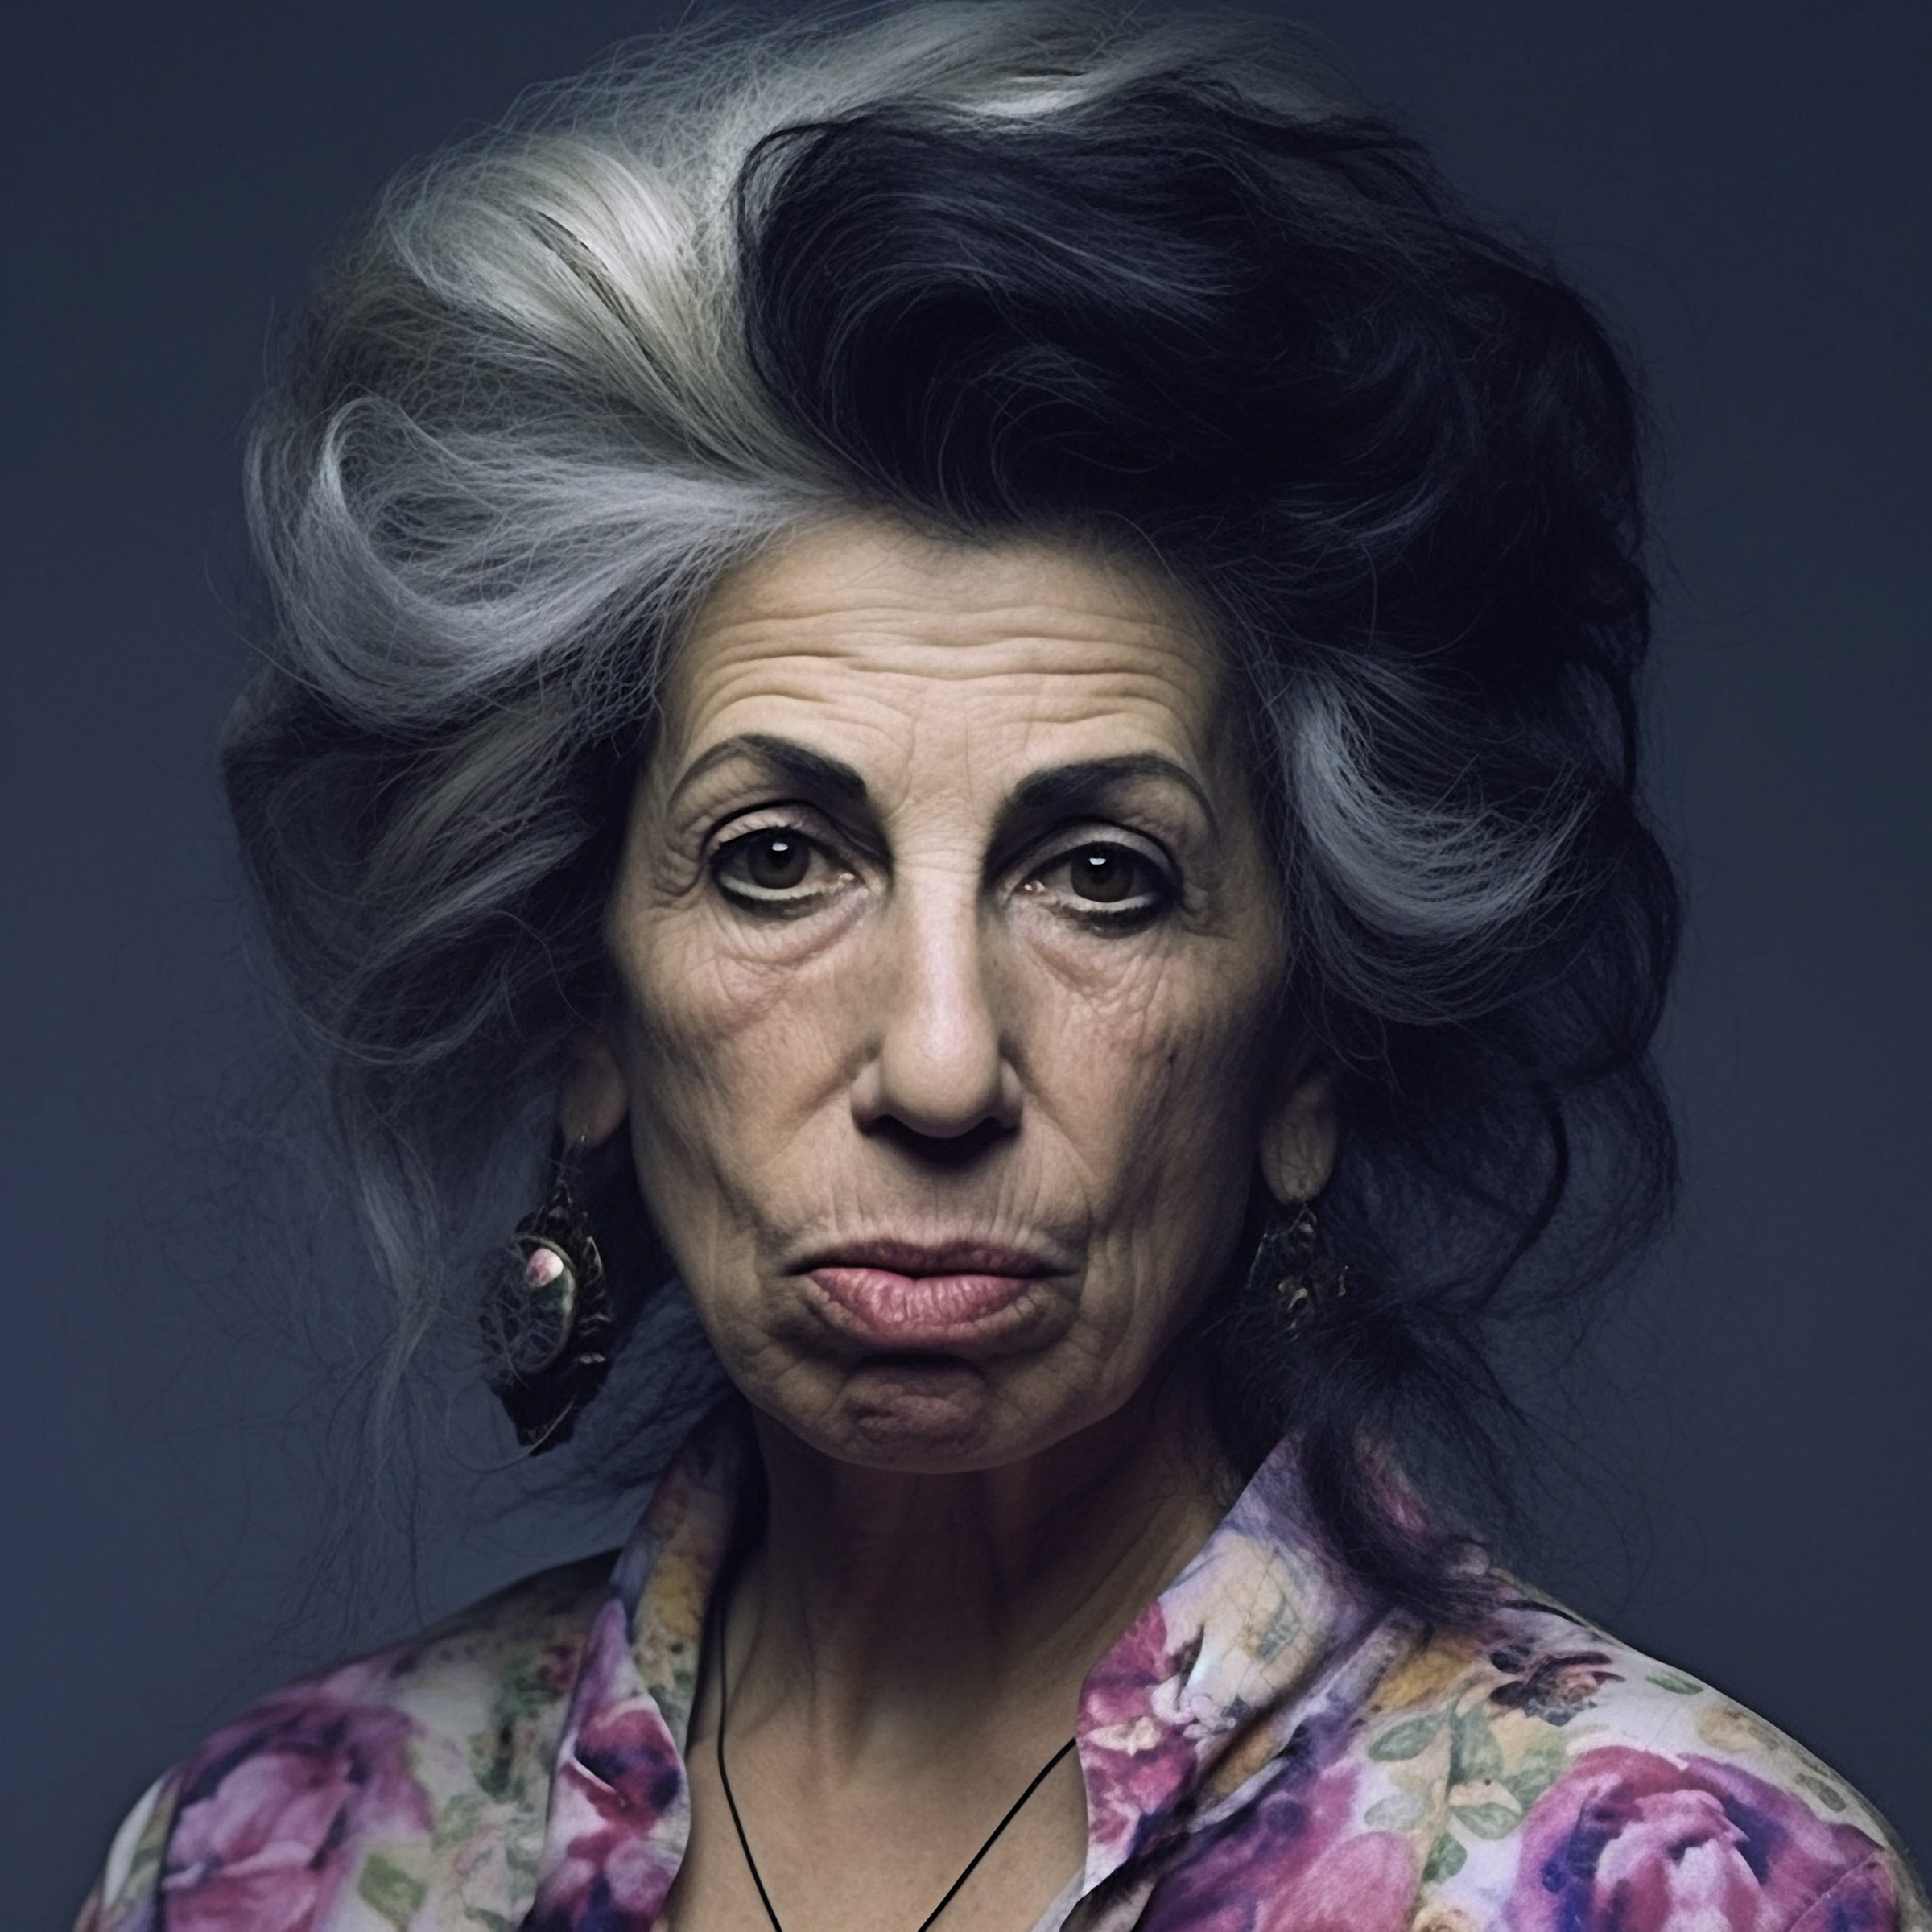 Winehouse imagined as an older person